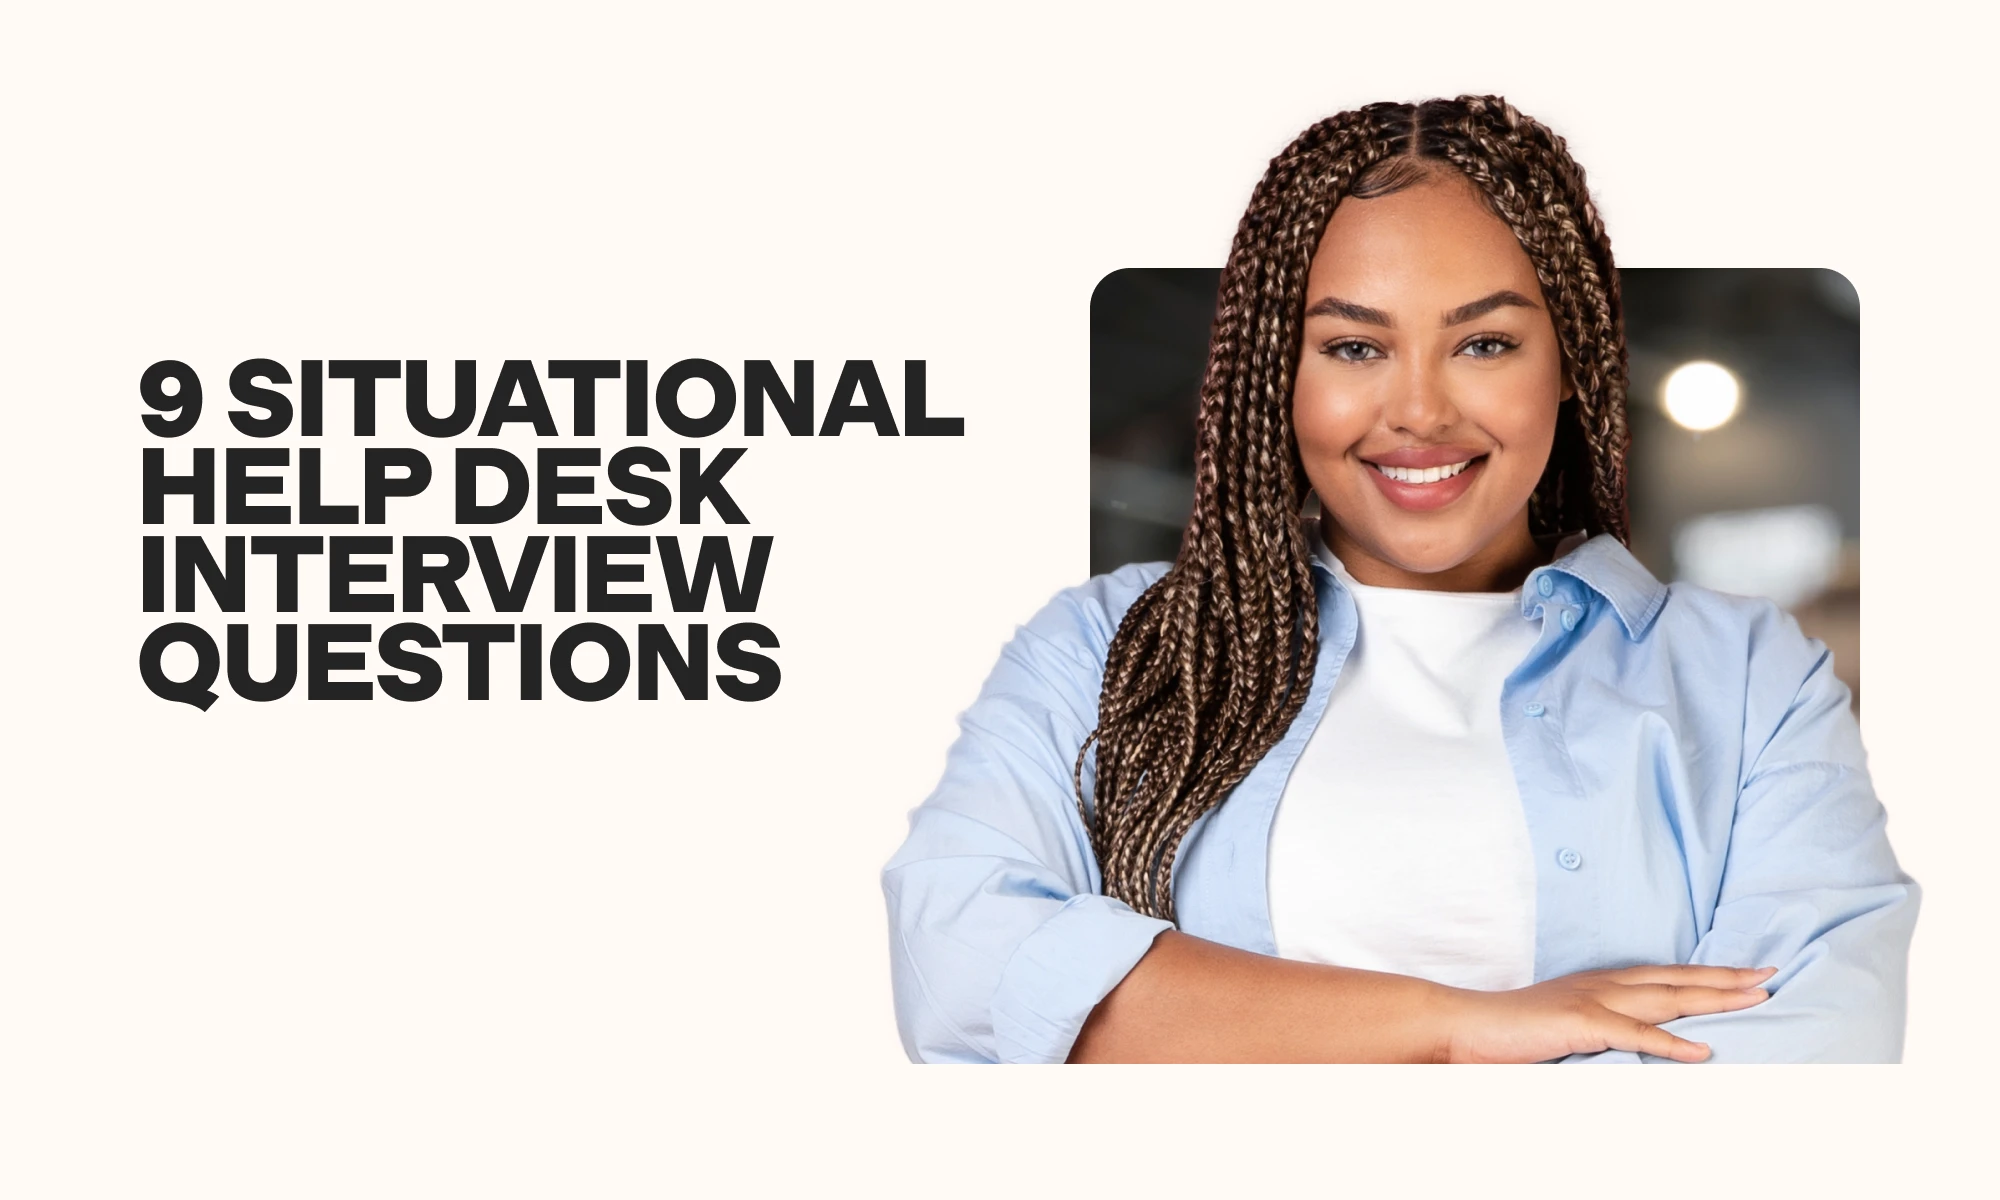 9 situational help desk interview questions